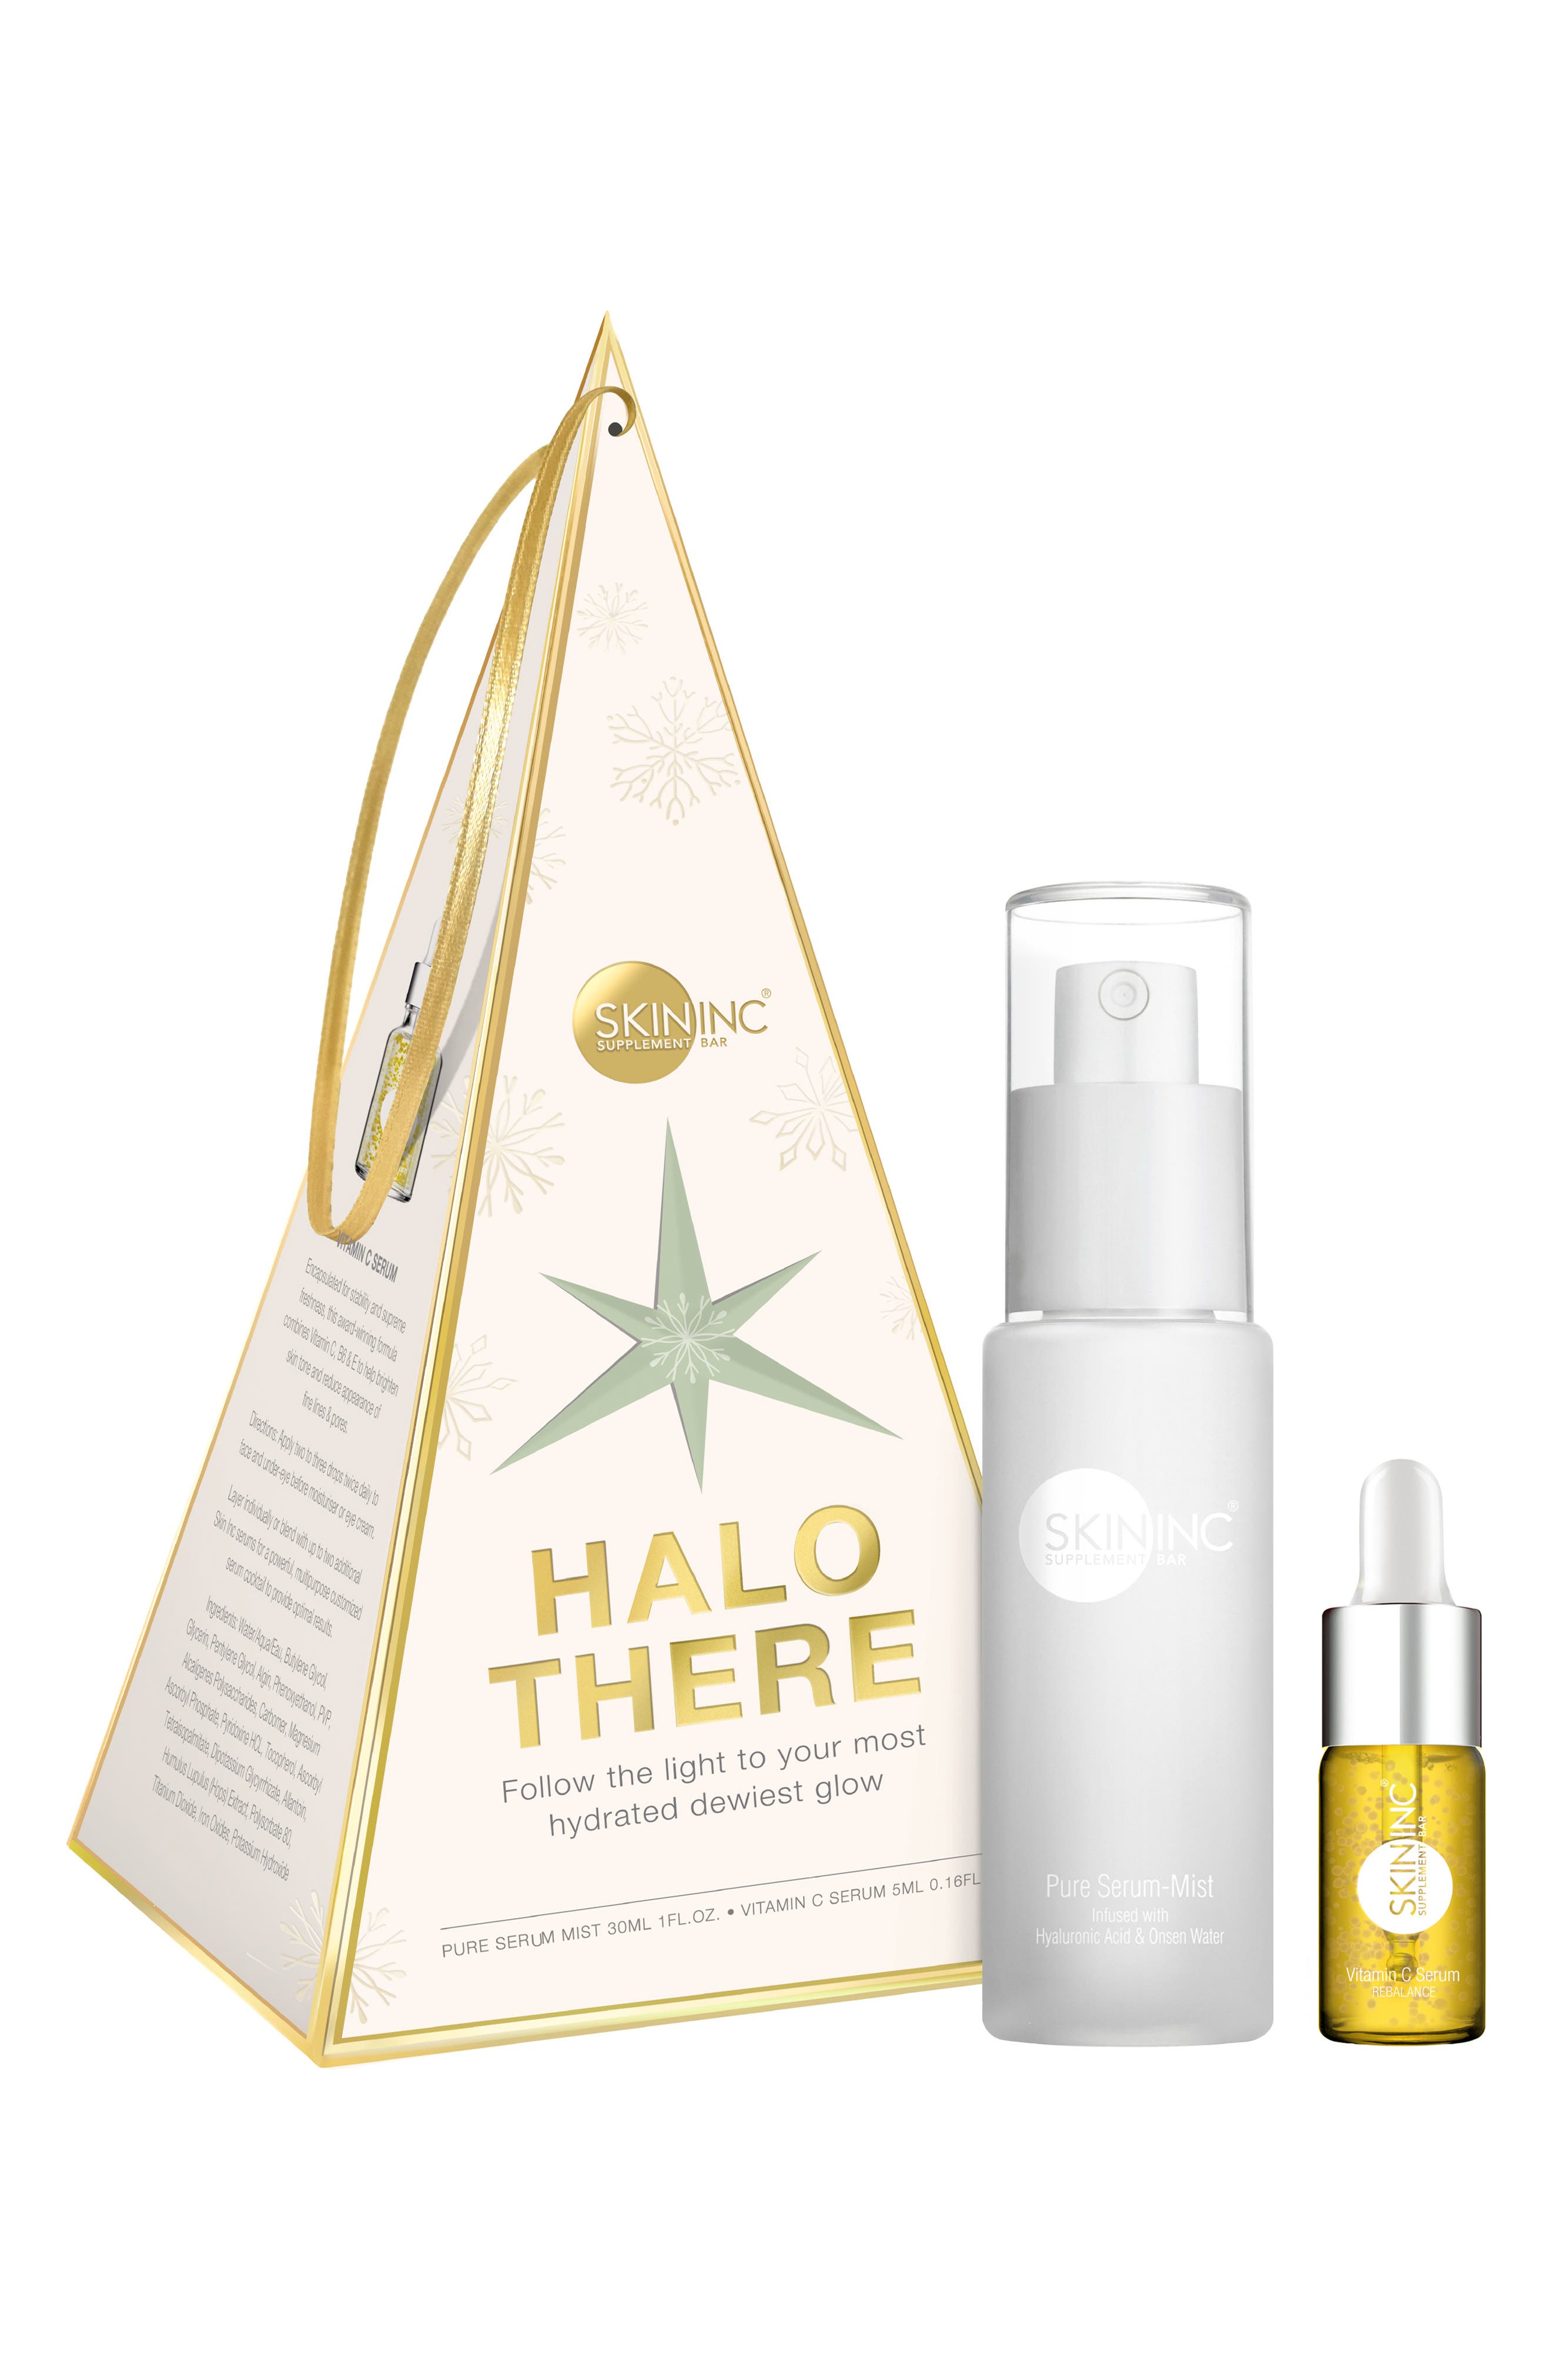 Skin Inc. Halo There Serum Set USD $37.50 Value in None at Nordstrom